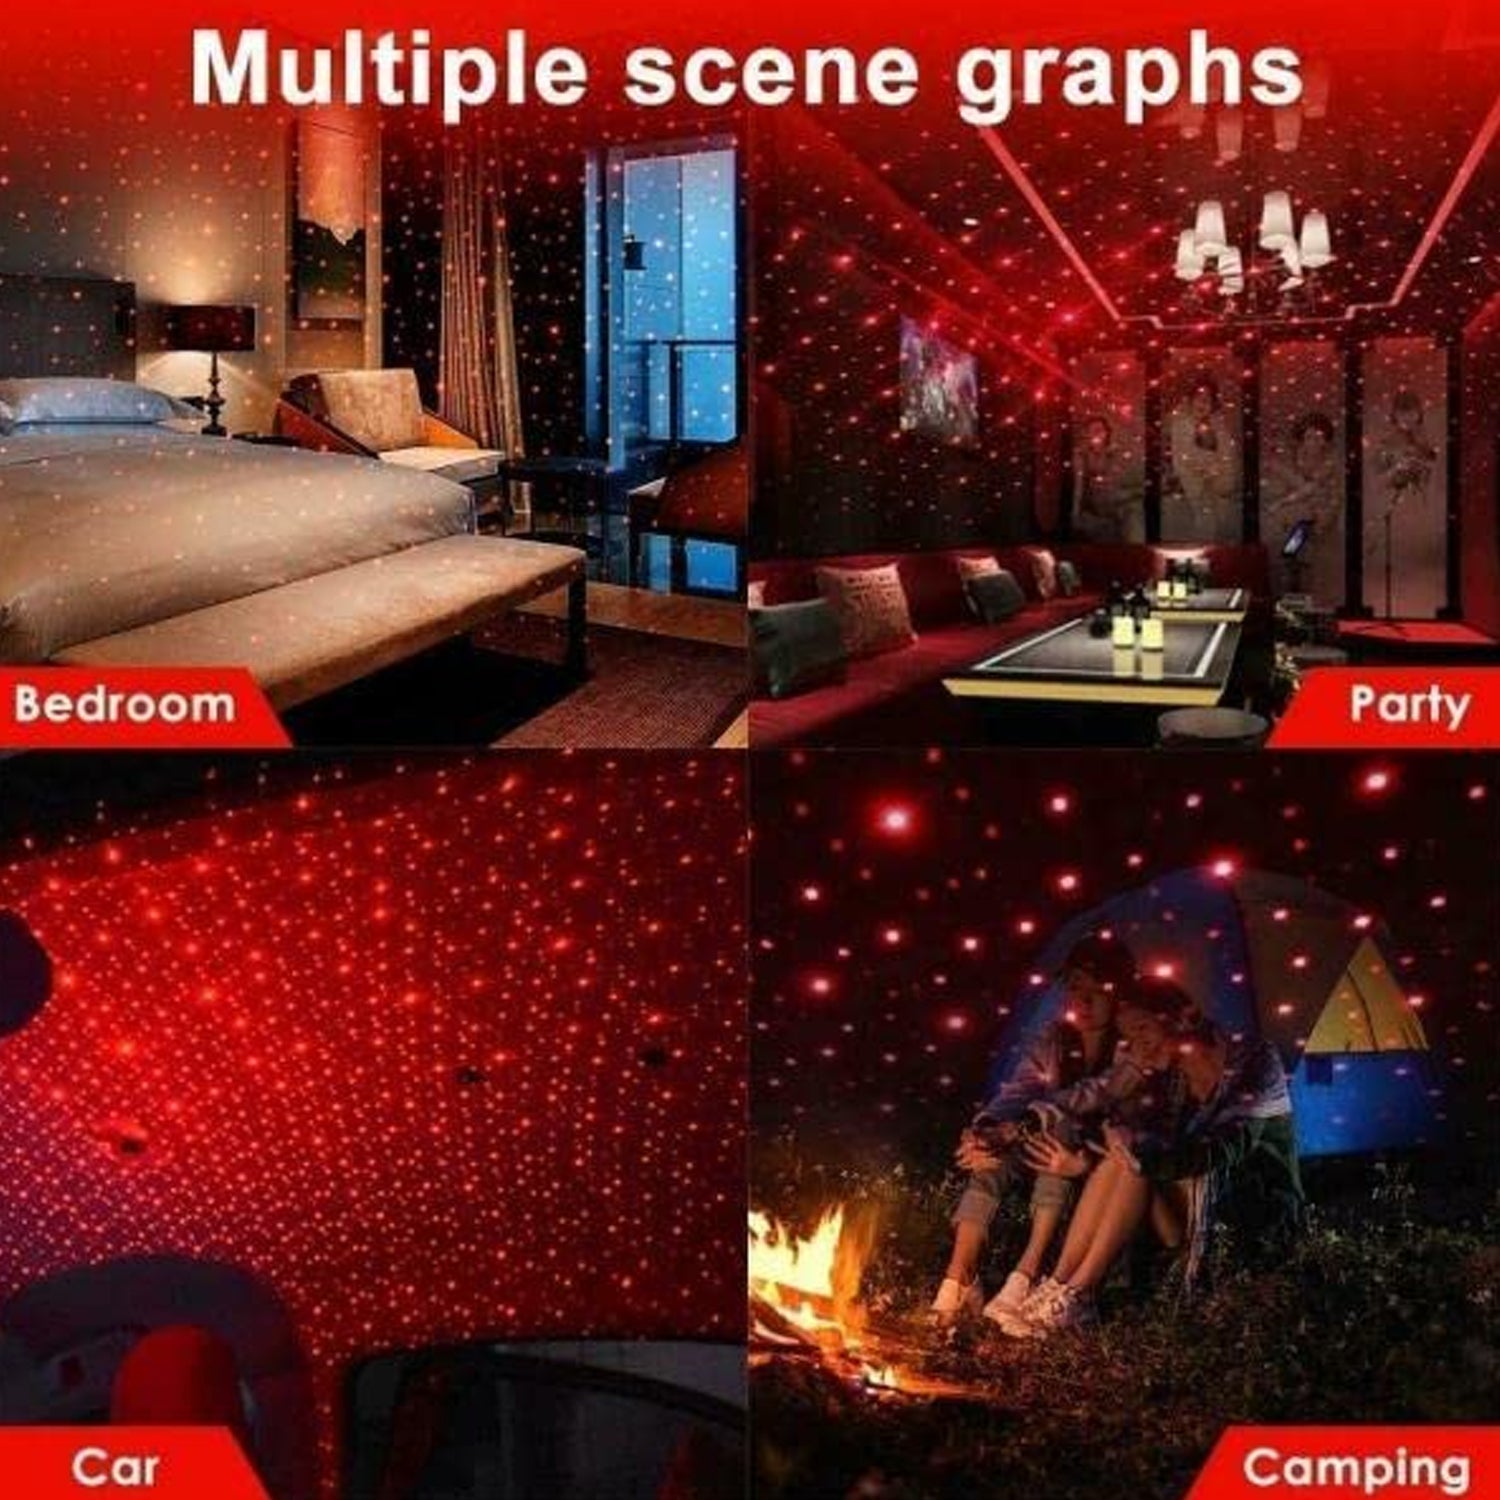 7290  Multipurpose Laser Light Light Galaxy Night Sky Ambiance Laser Micro Projector Atmosphere Ambient Roof Usb Light, Car, Ceiling, Bedroom for Party (1 Pc)